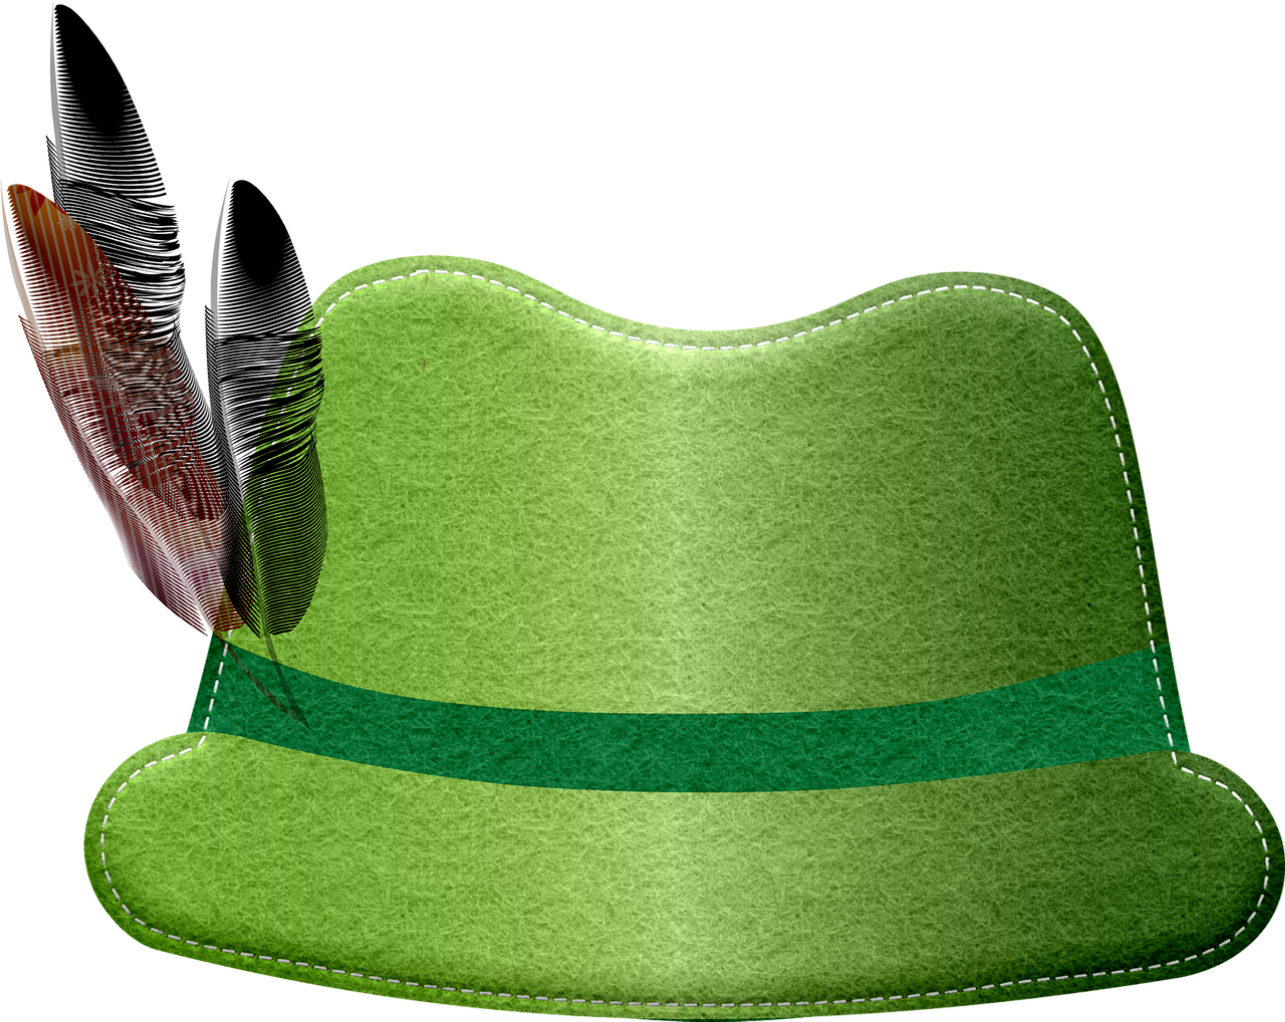 A Green Hat With A Feather